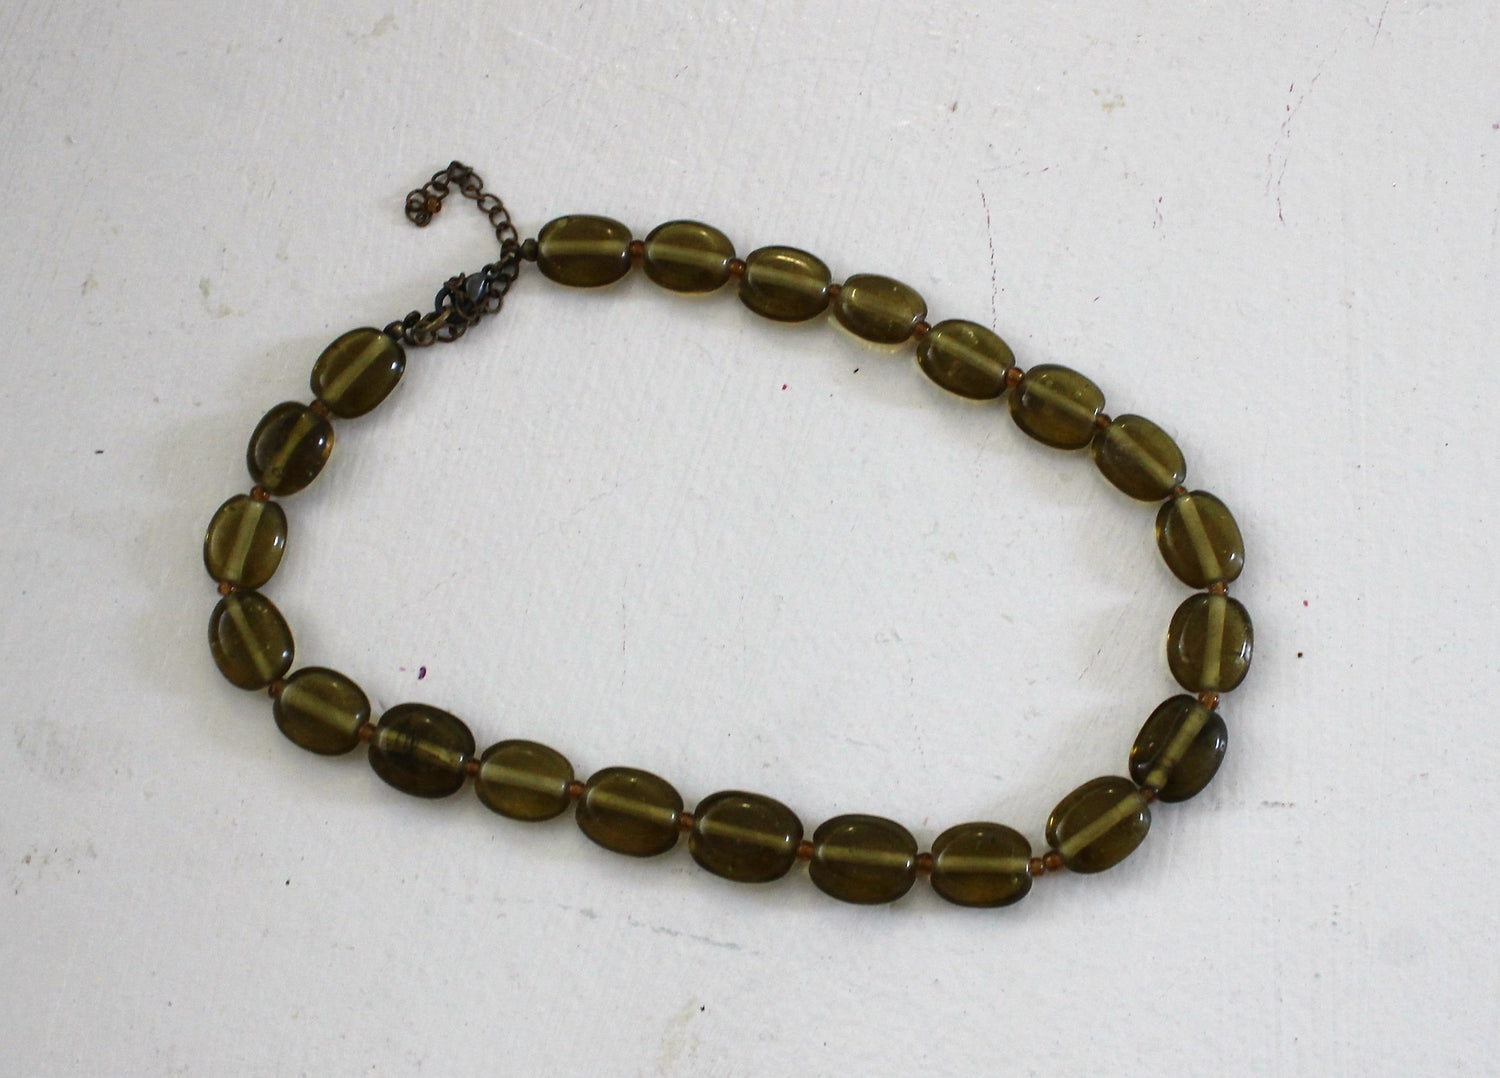 Vintage 1950s Green Glass Bead Necklace